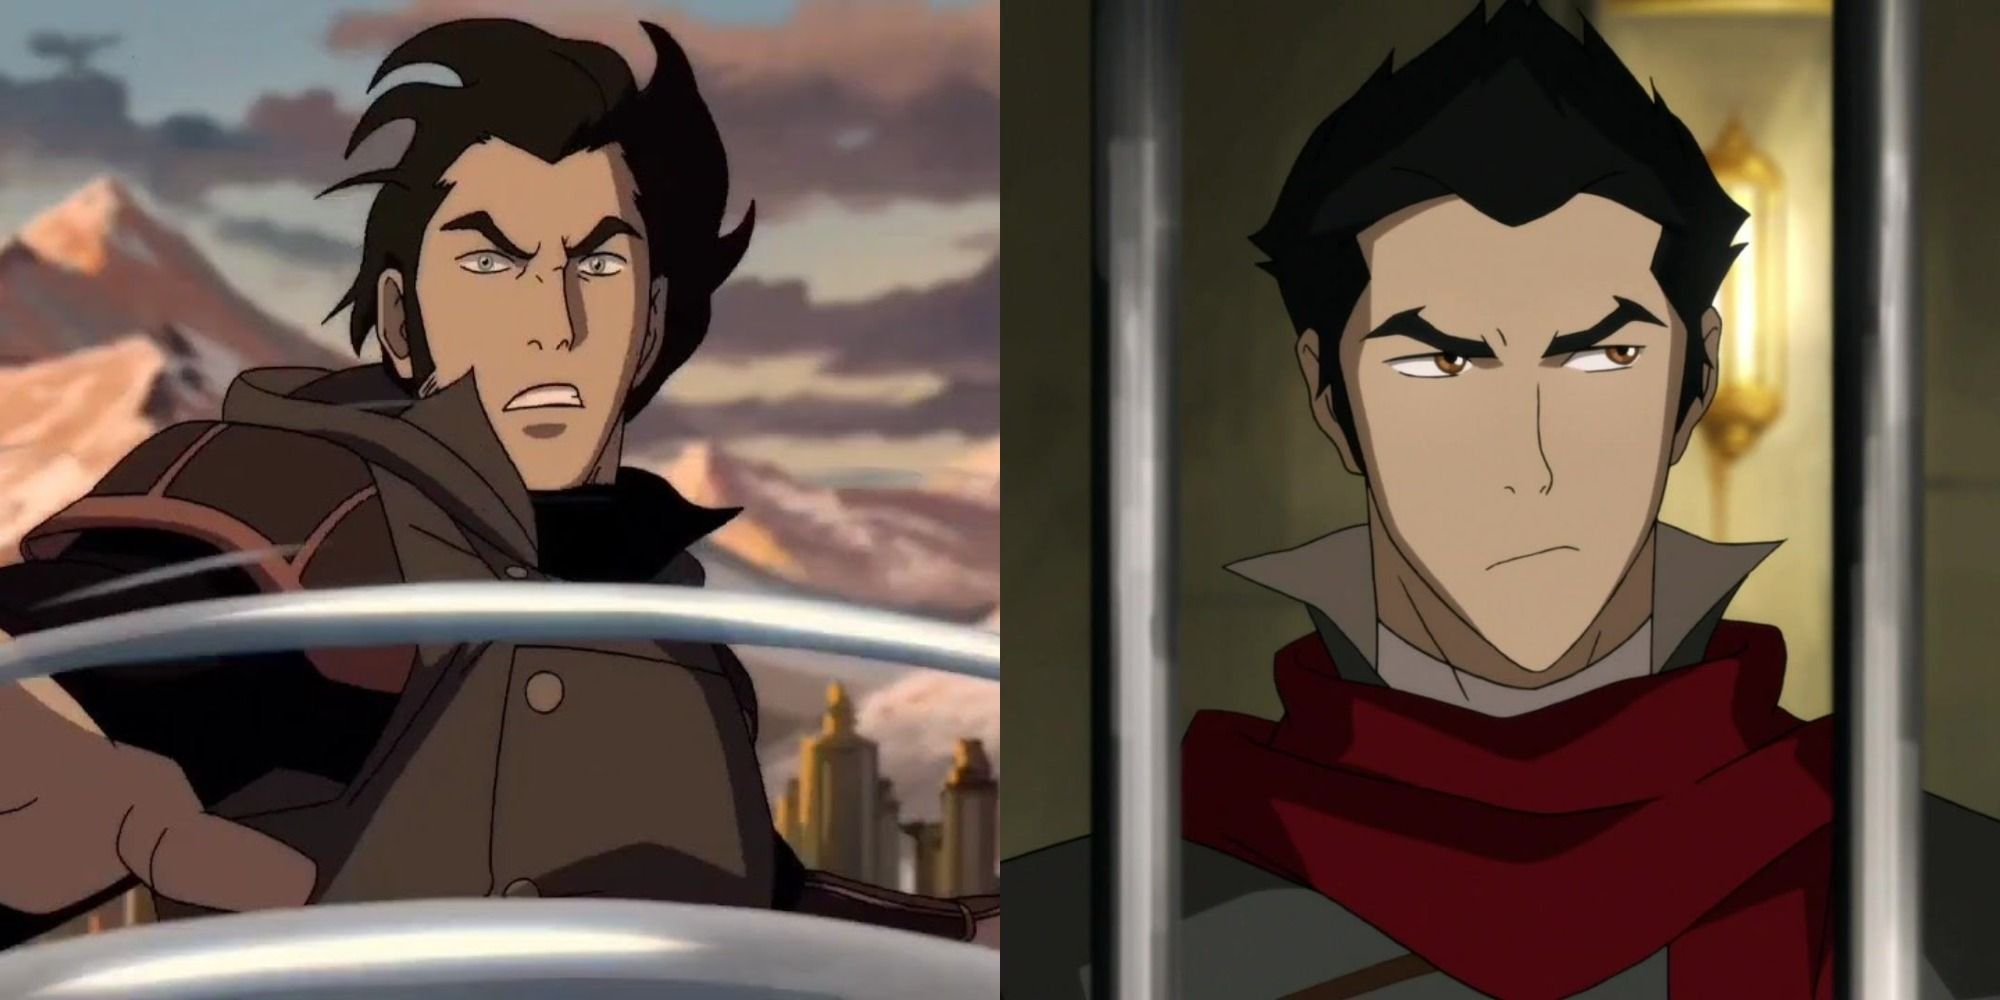 Split image of Amon and Mako from The Legend of Korra